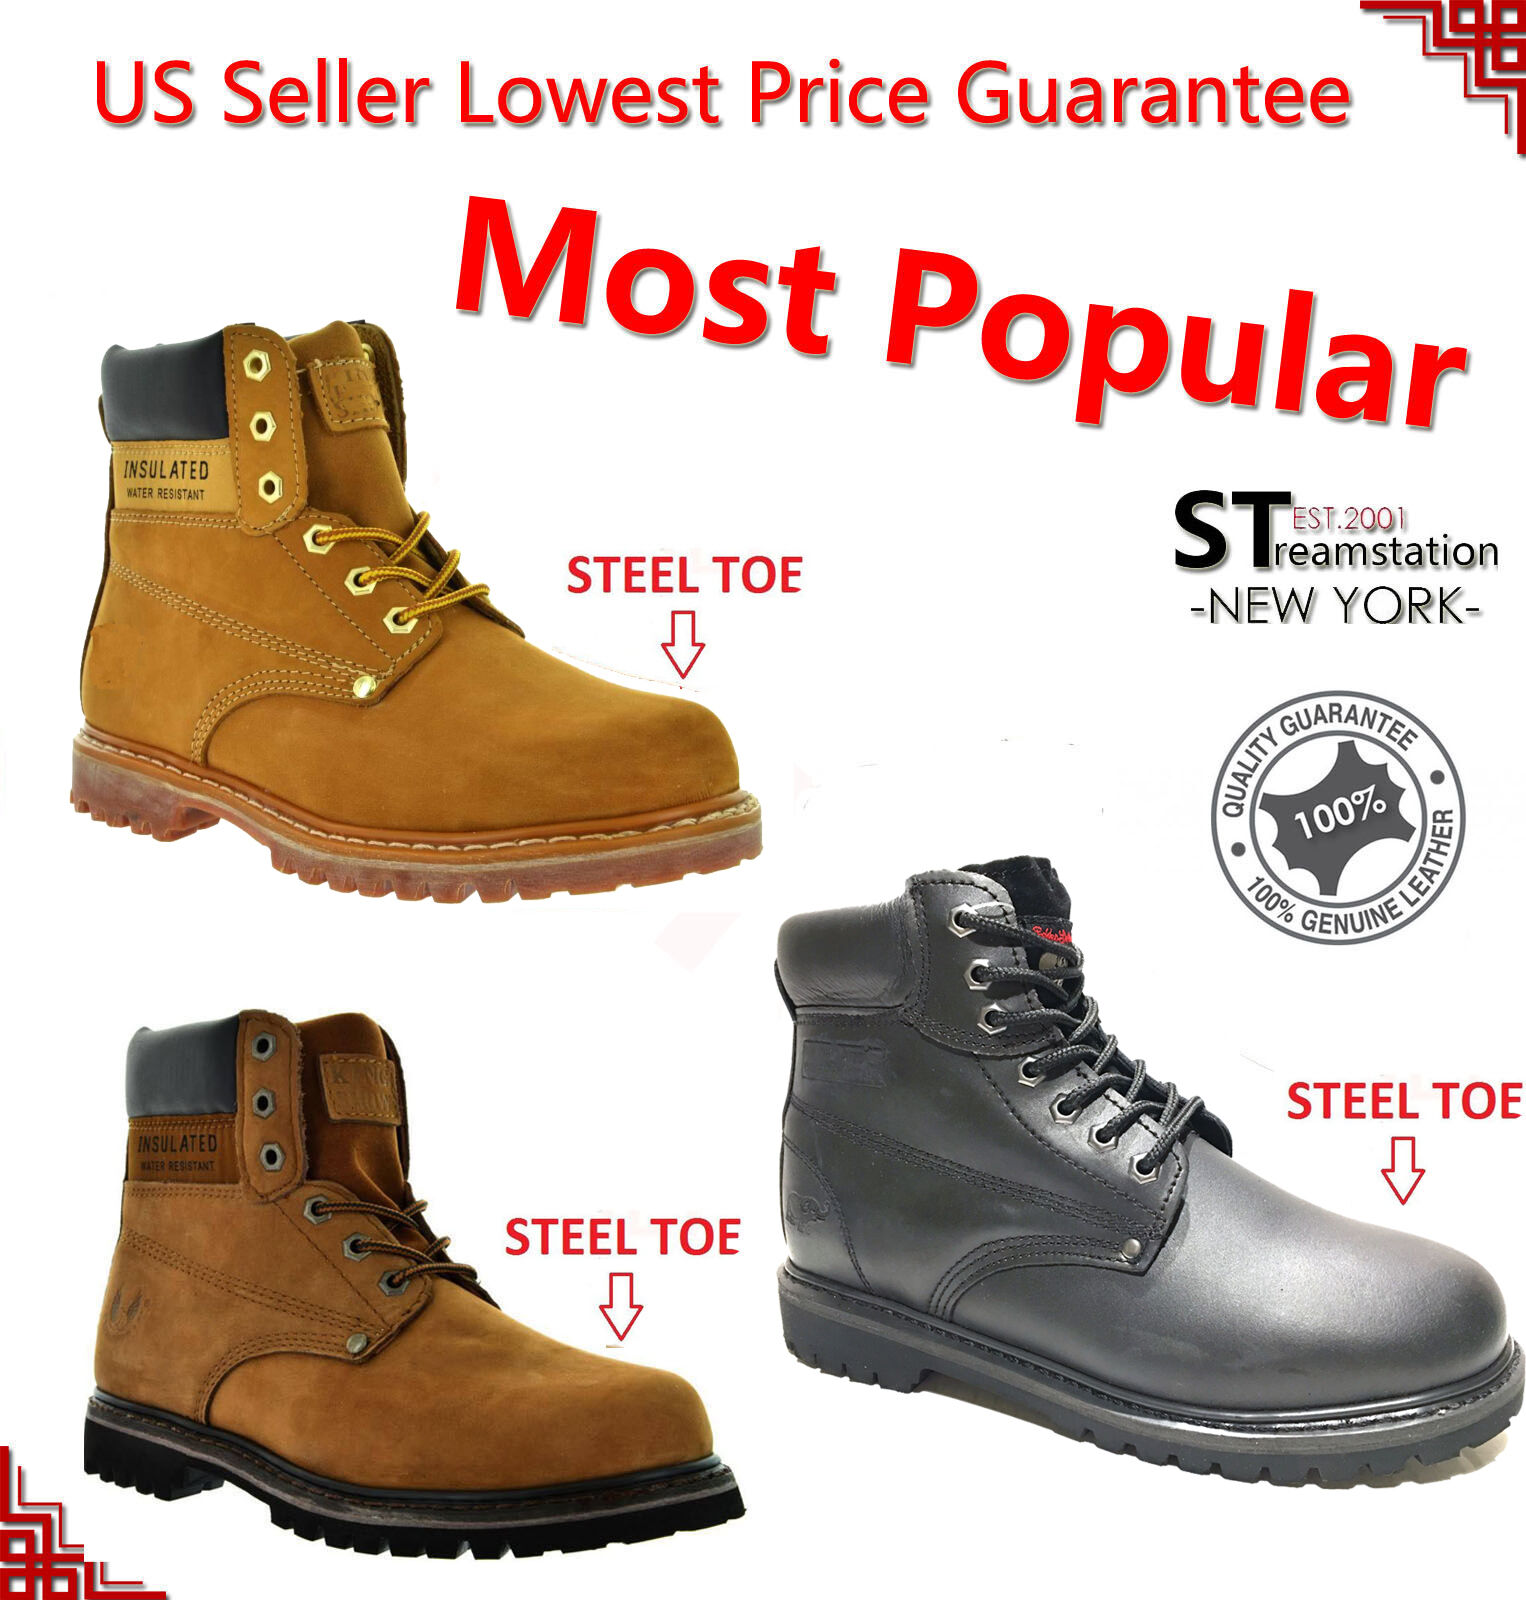 Men's 6" Work Boots Shoes With Steel Toe Leather Shoe Lace Up A6011ST 8605ST Unbranded